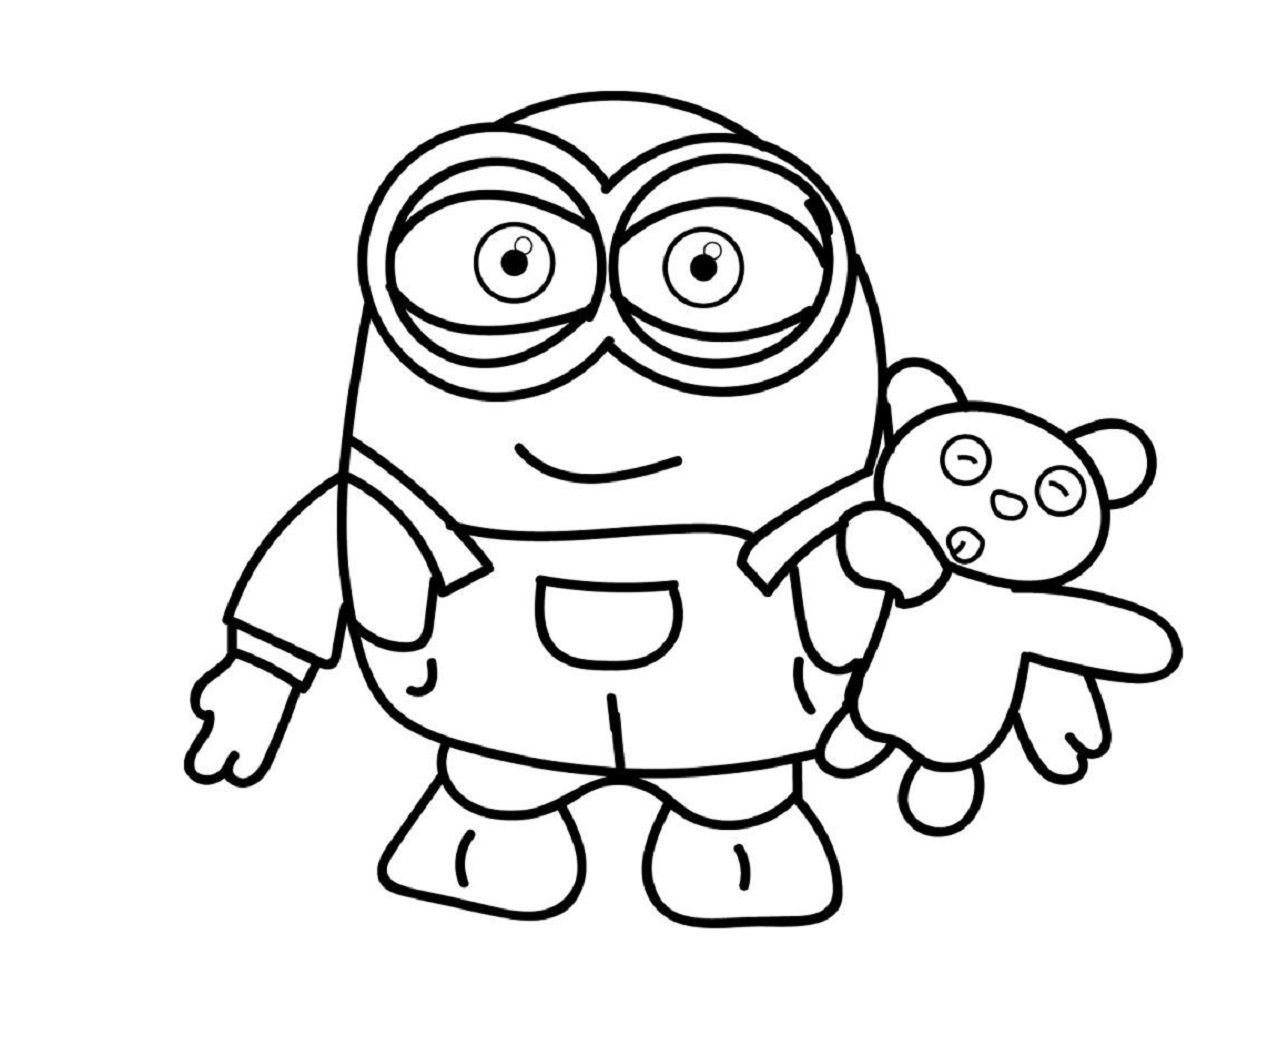 Printable Minion Bob's toy bear Coloring Page for kids.